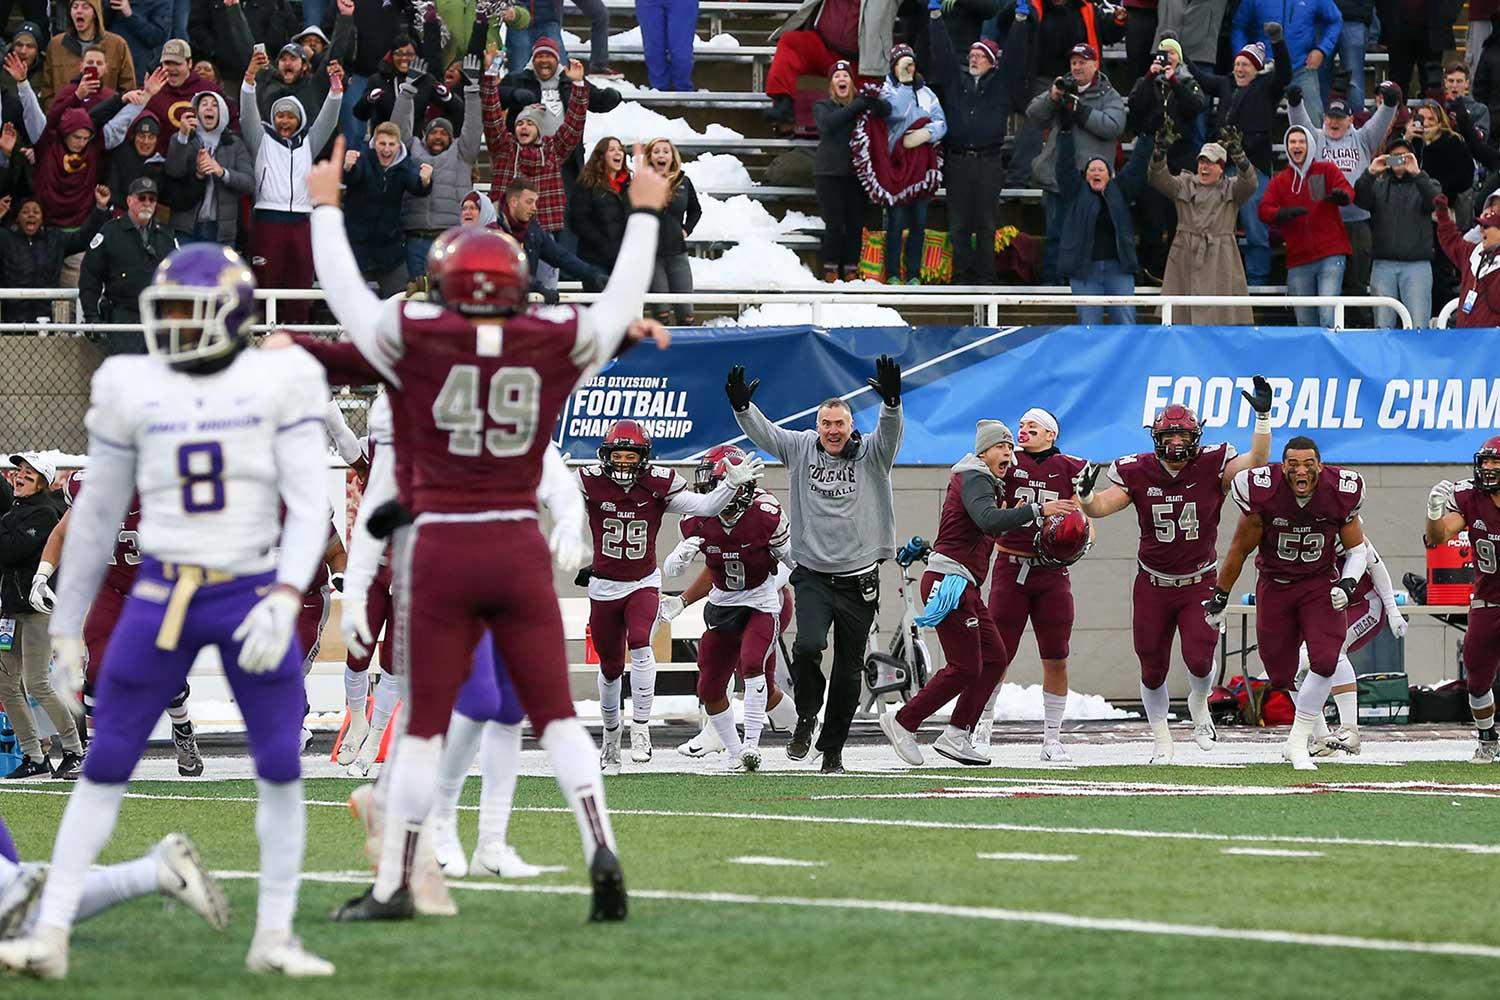 Head Football Coach Dan Hunt and the Raiders football team celebrates a last-minute NCAA playoff victory over James Madison on December 1, 2018.